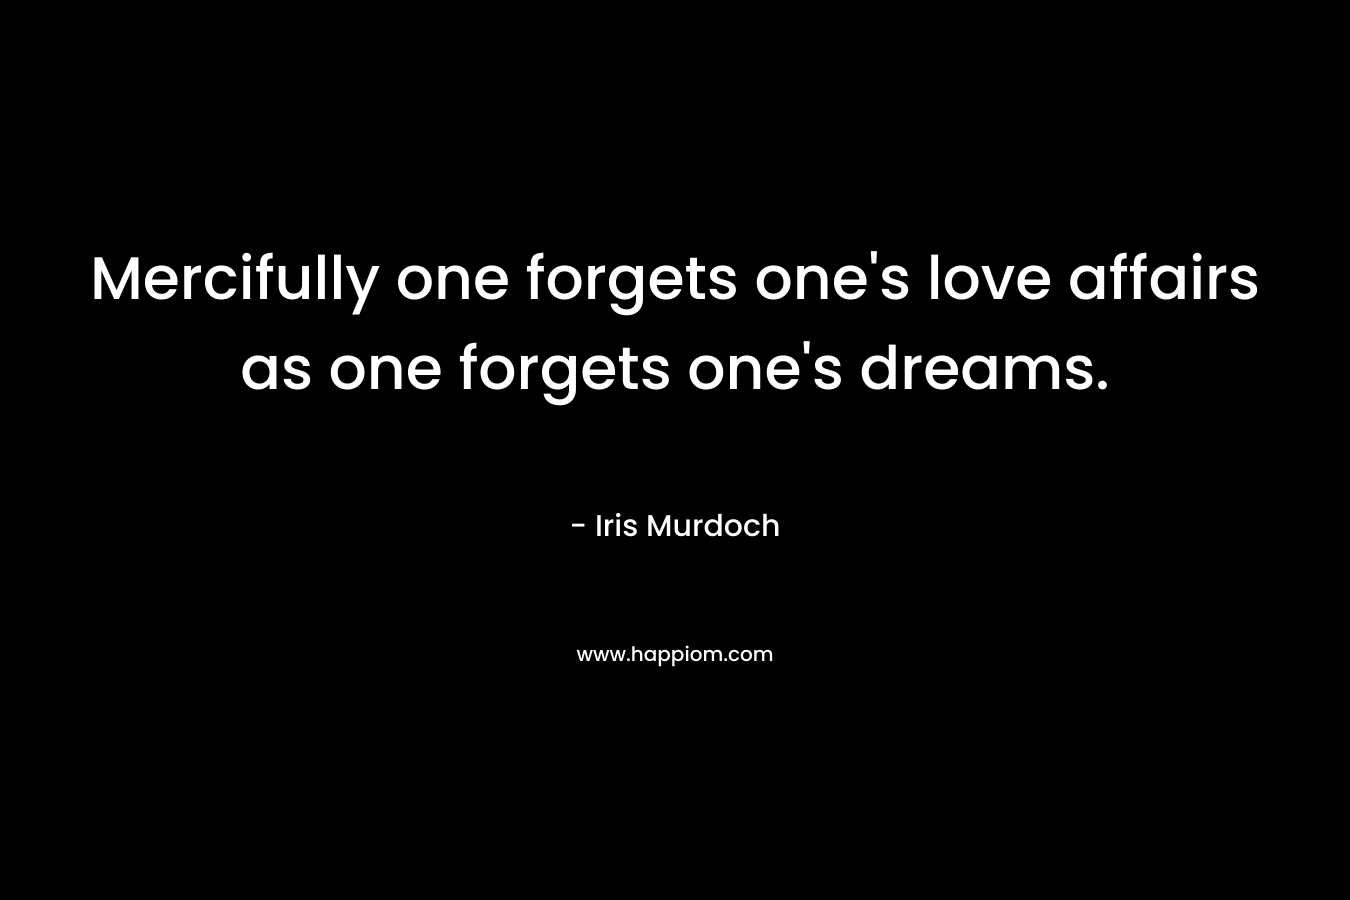 Mercifully one forgets one's love affairs as one forgets one's dreams.